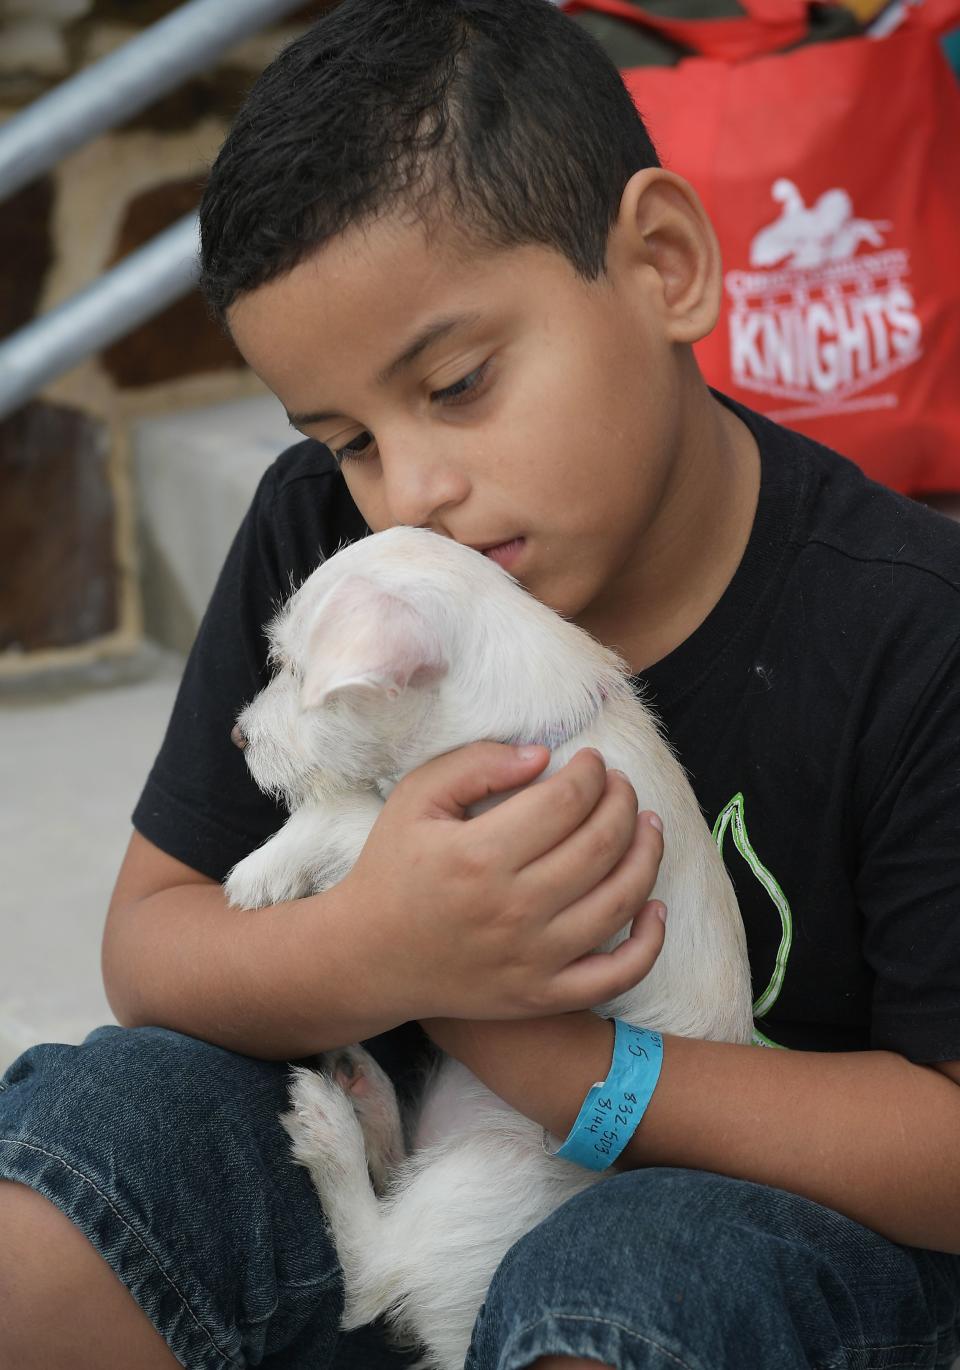 Joshua Lopez, 9, holds puppy Cali outside of College Park High School which was set up as a temporary shelter for Hurricane Harvey evacuaees in The Woodlands, Texas on August 30, 2017.  The school which was set up as a shelter on Monday for those affected by the storm, is now preparing to re-open its door to students next week. / AFP PHOTO / MANDEL NGAN        (Photo credit should read MANDEL NGAN/AFP/Getty Images)